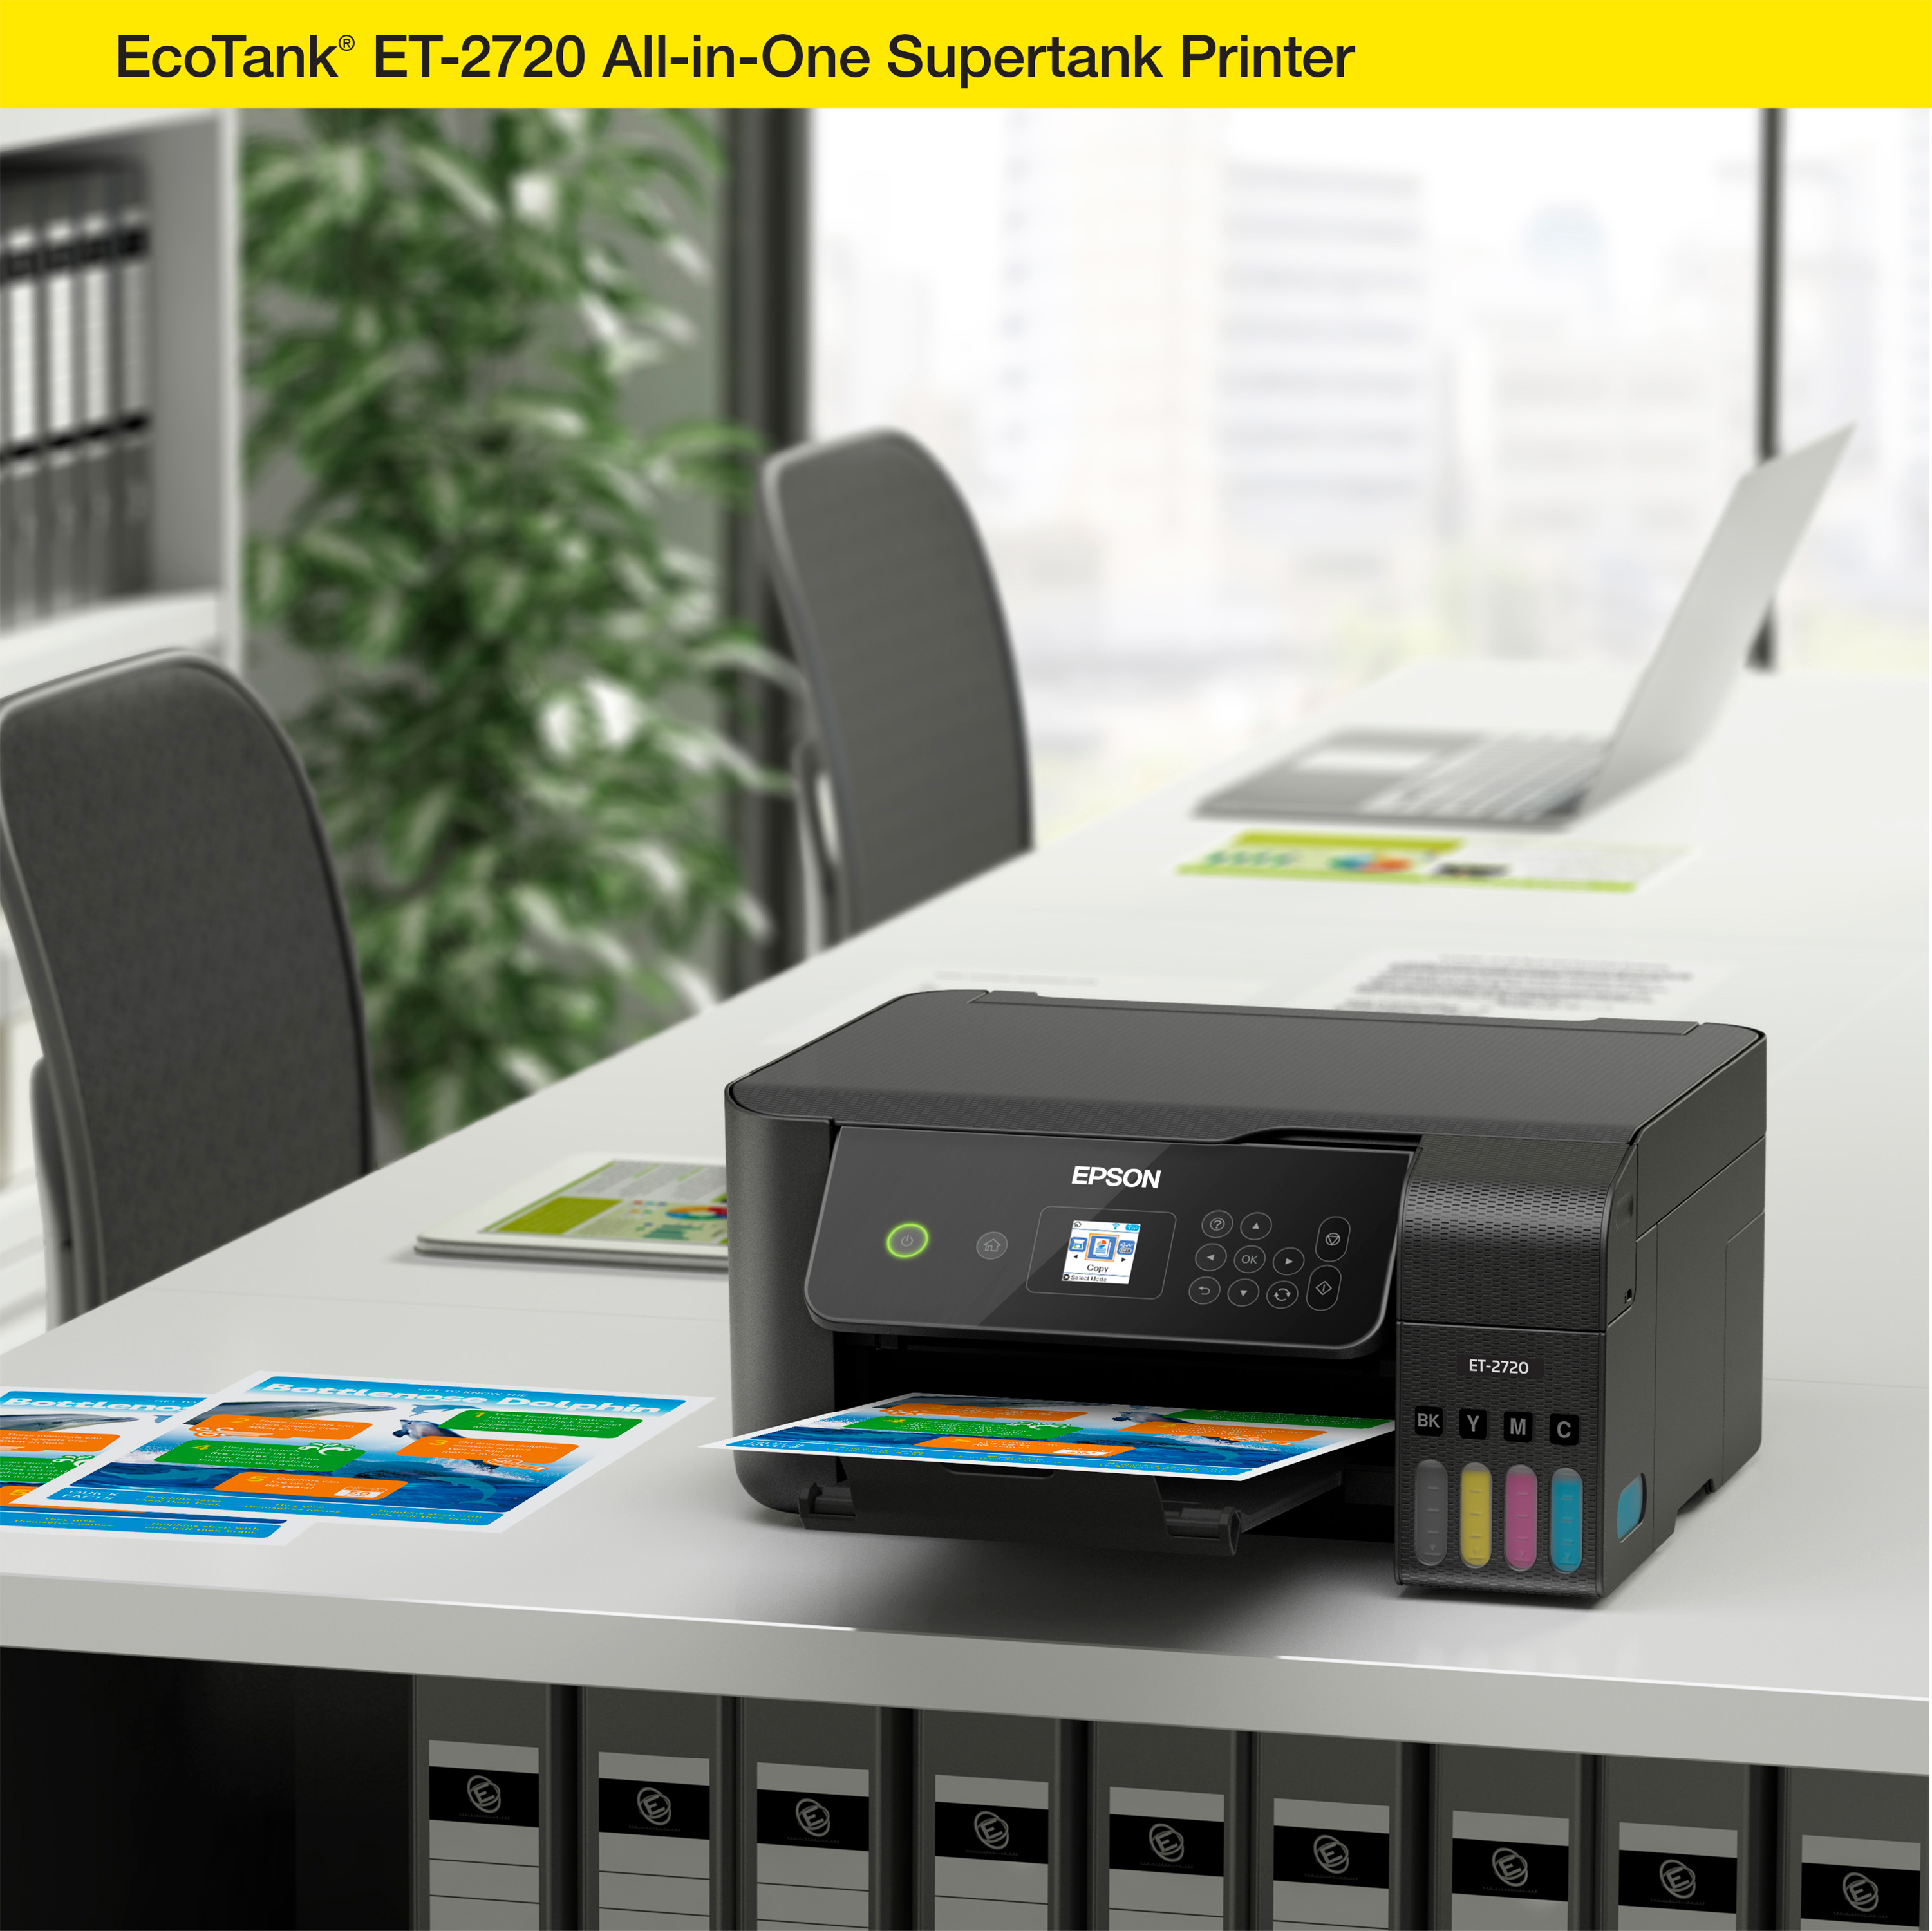 Epson EcoTank ET-2720 Wireless All-in-One Color Supertank Printer - Black - image 3 of 7